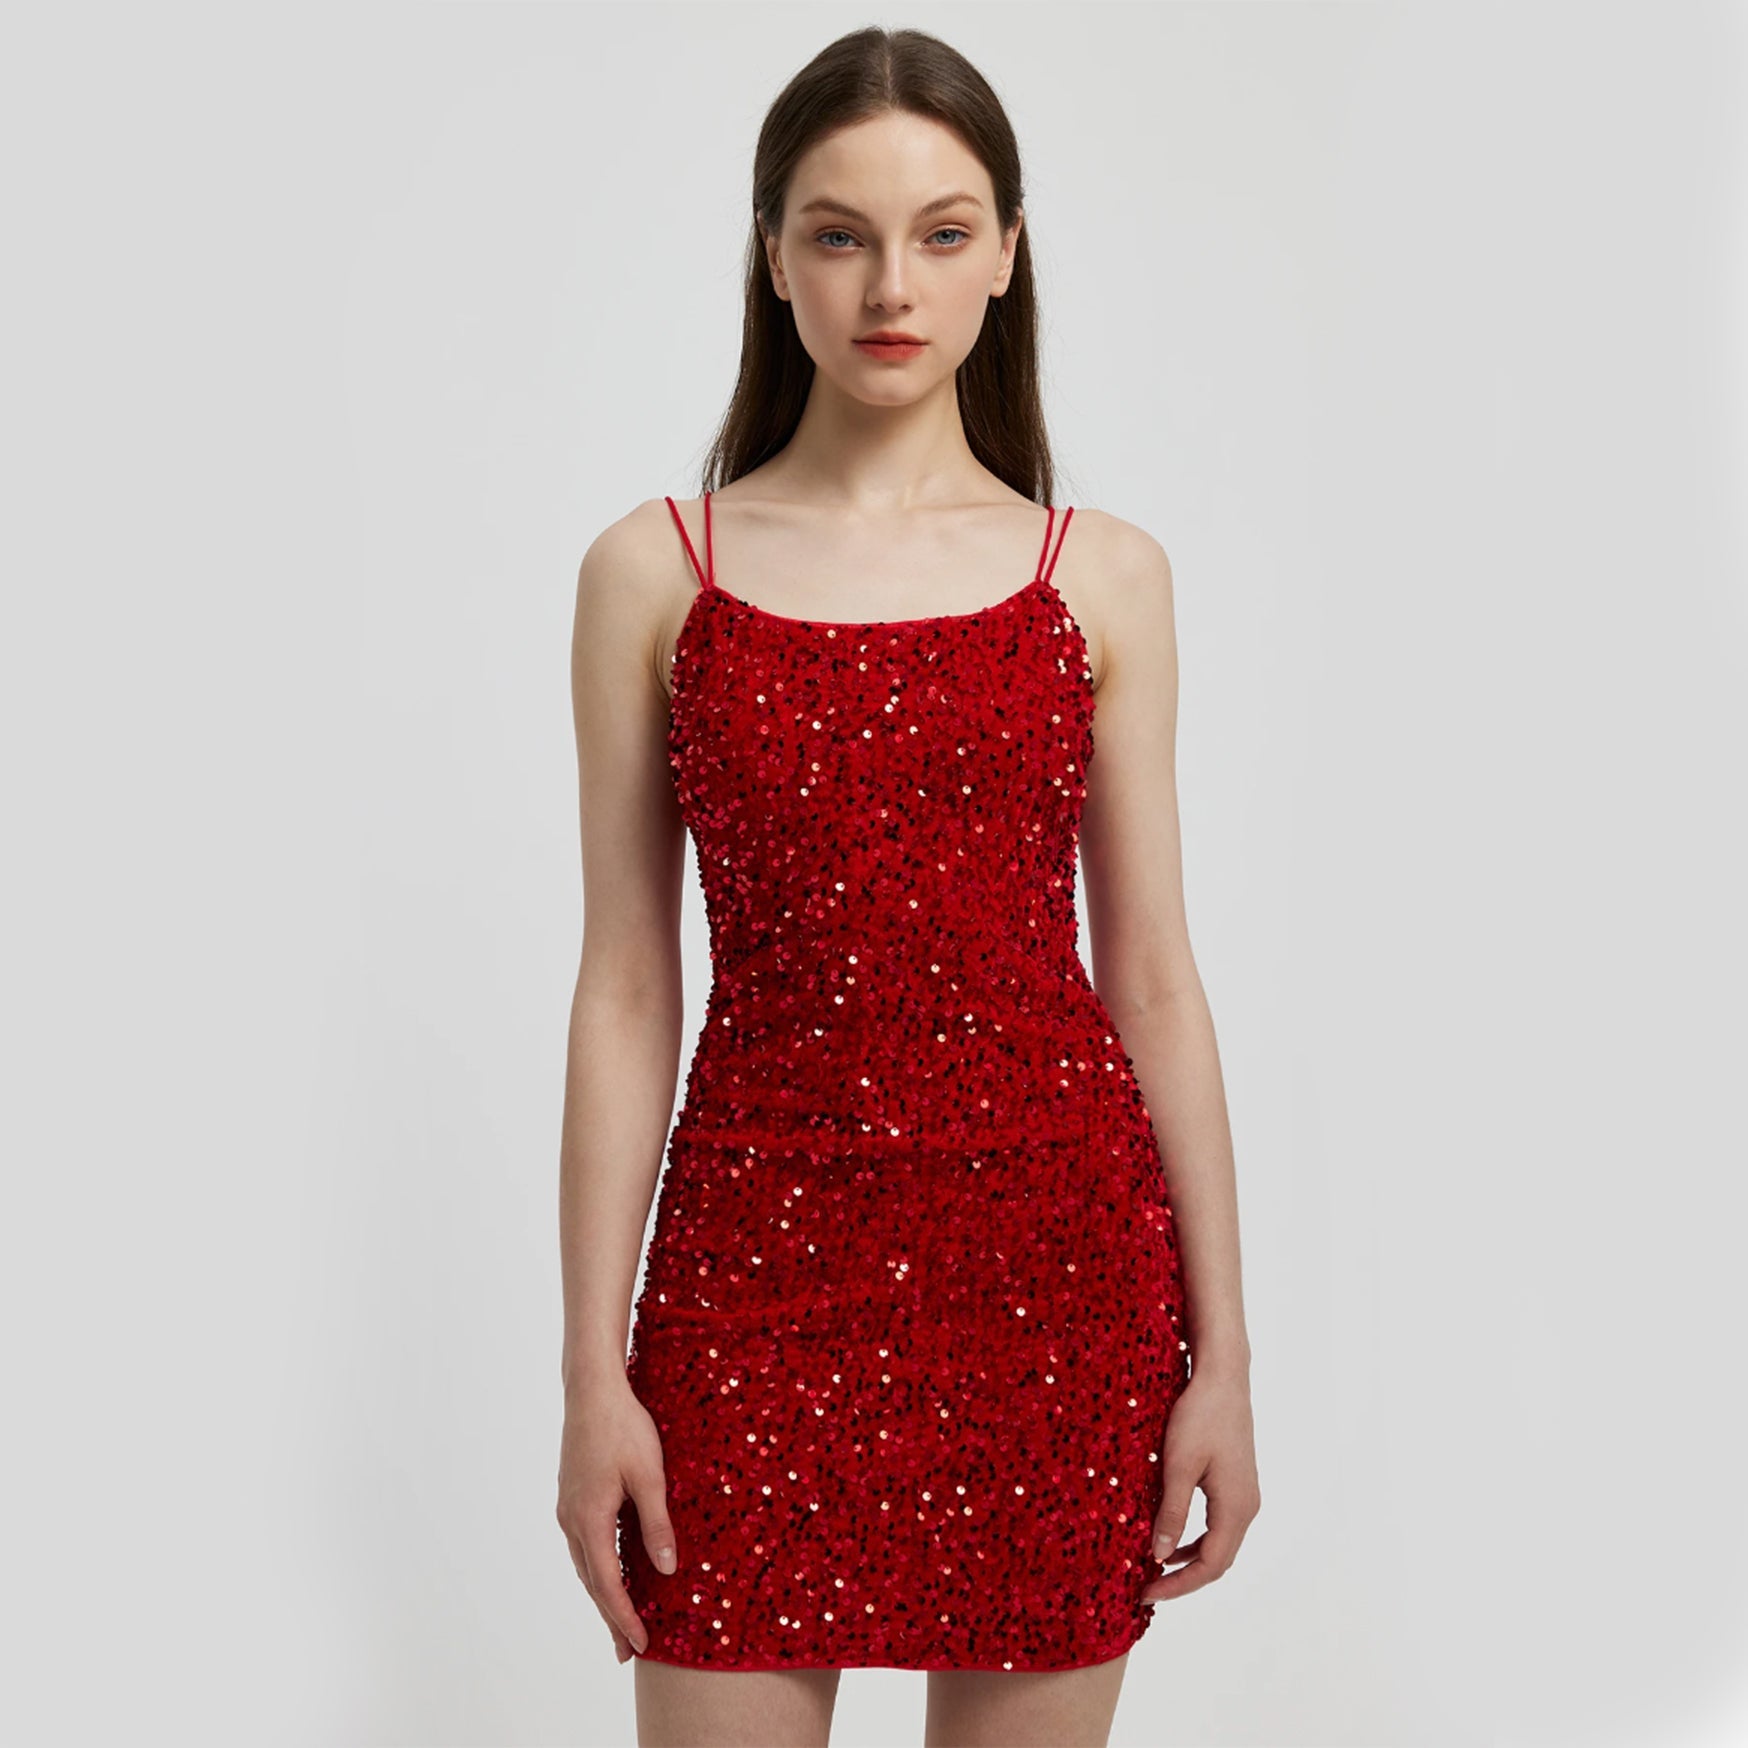 Backless Cocktail Dress - Red S